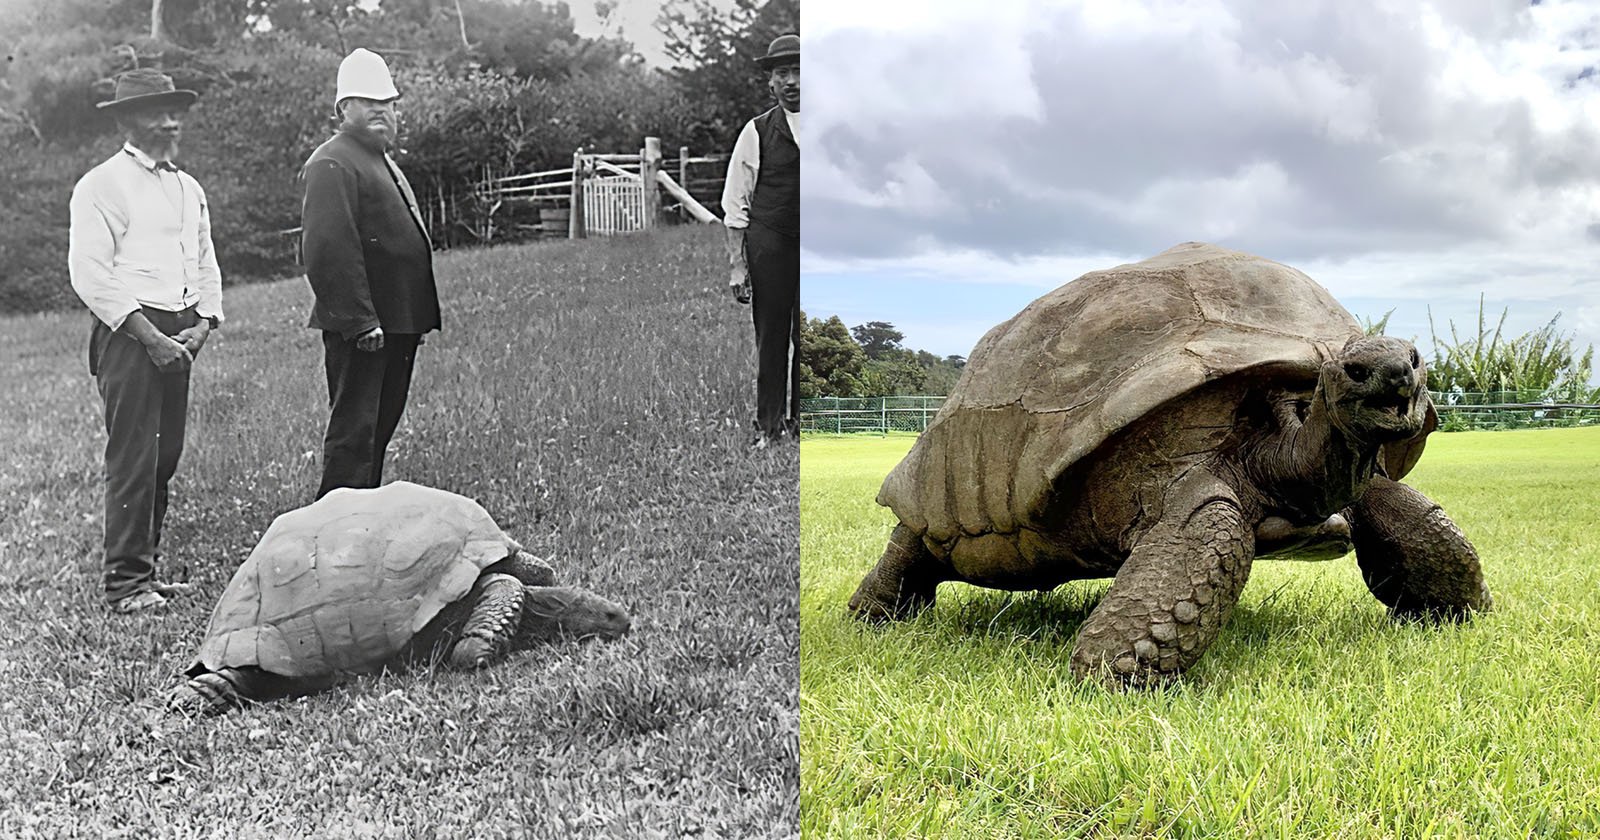 Jonathan the 190-Year-Old Tortoise Was Photographed in 1886 and Today |  PetaPixel